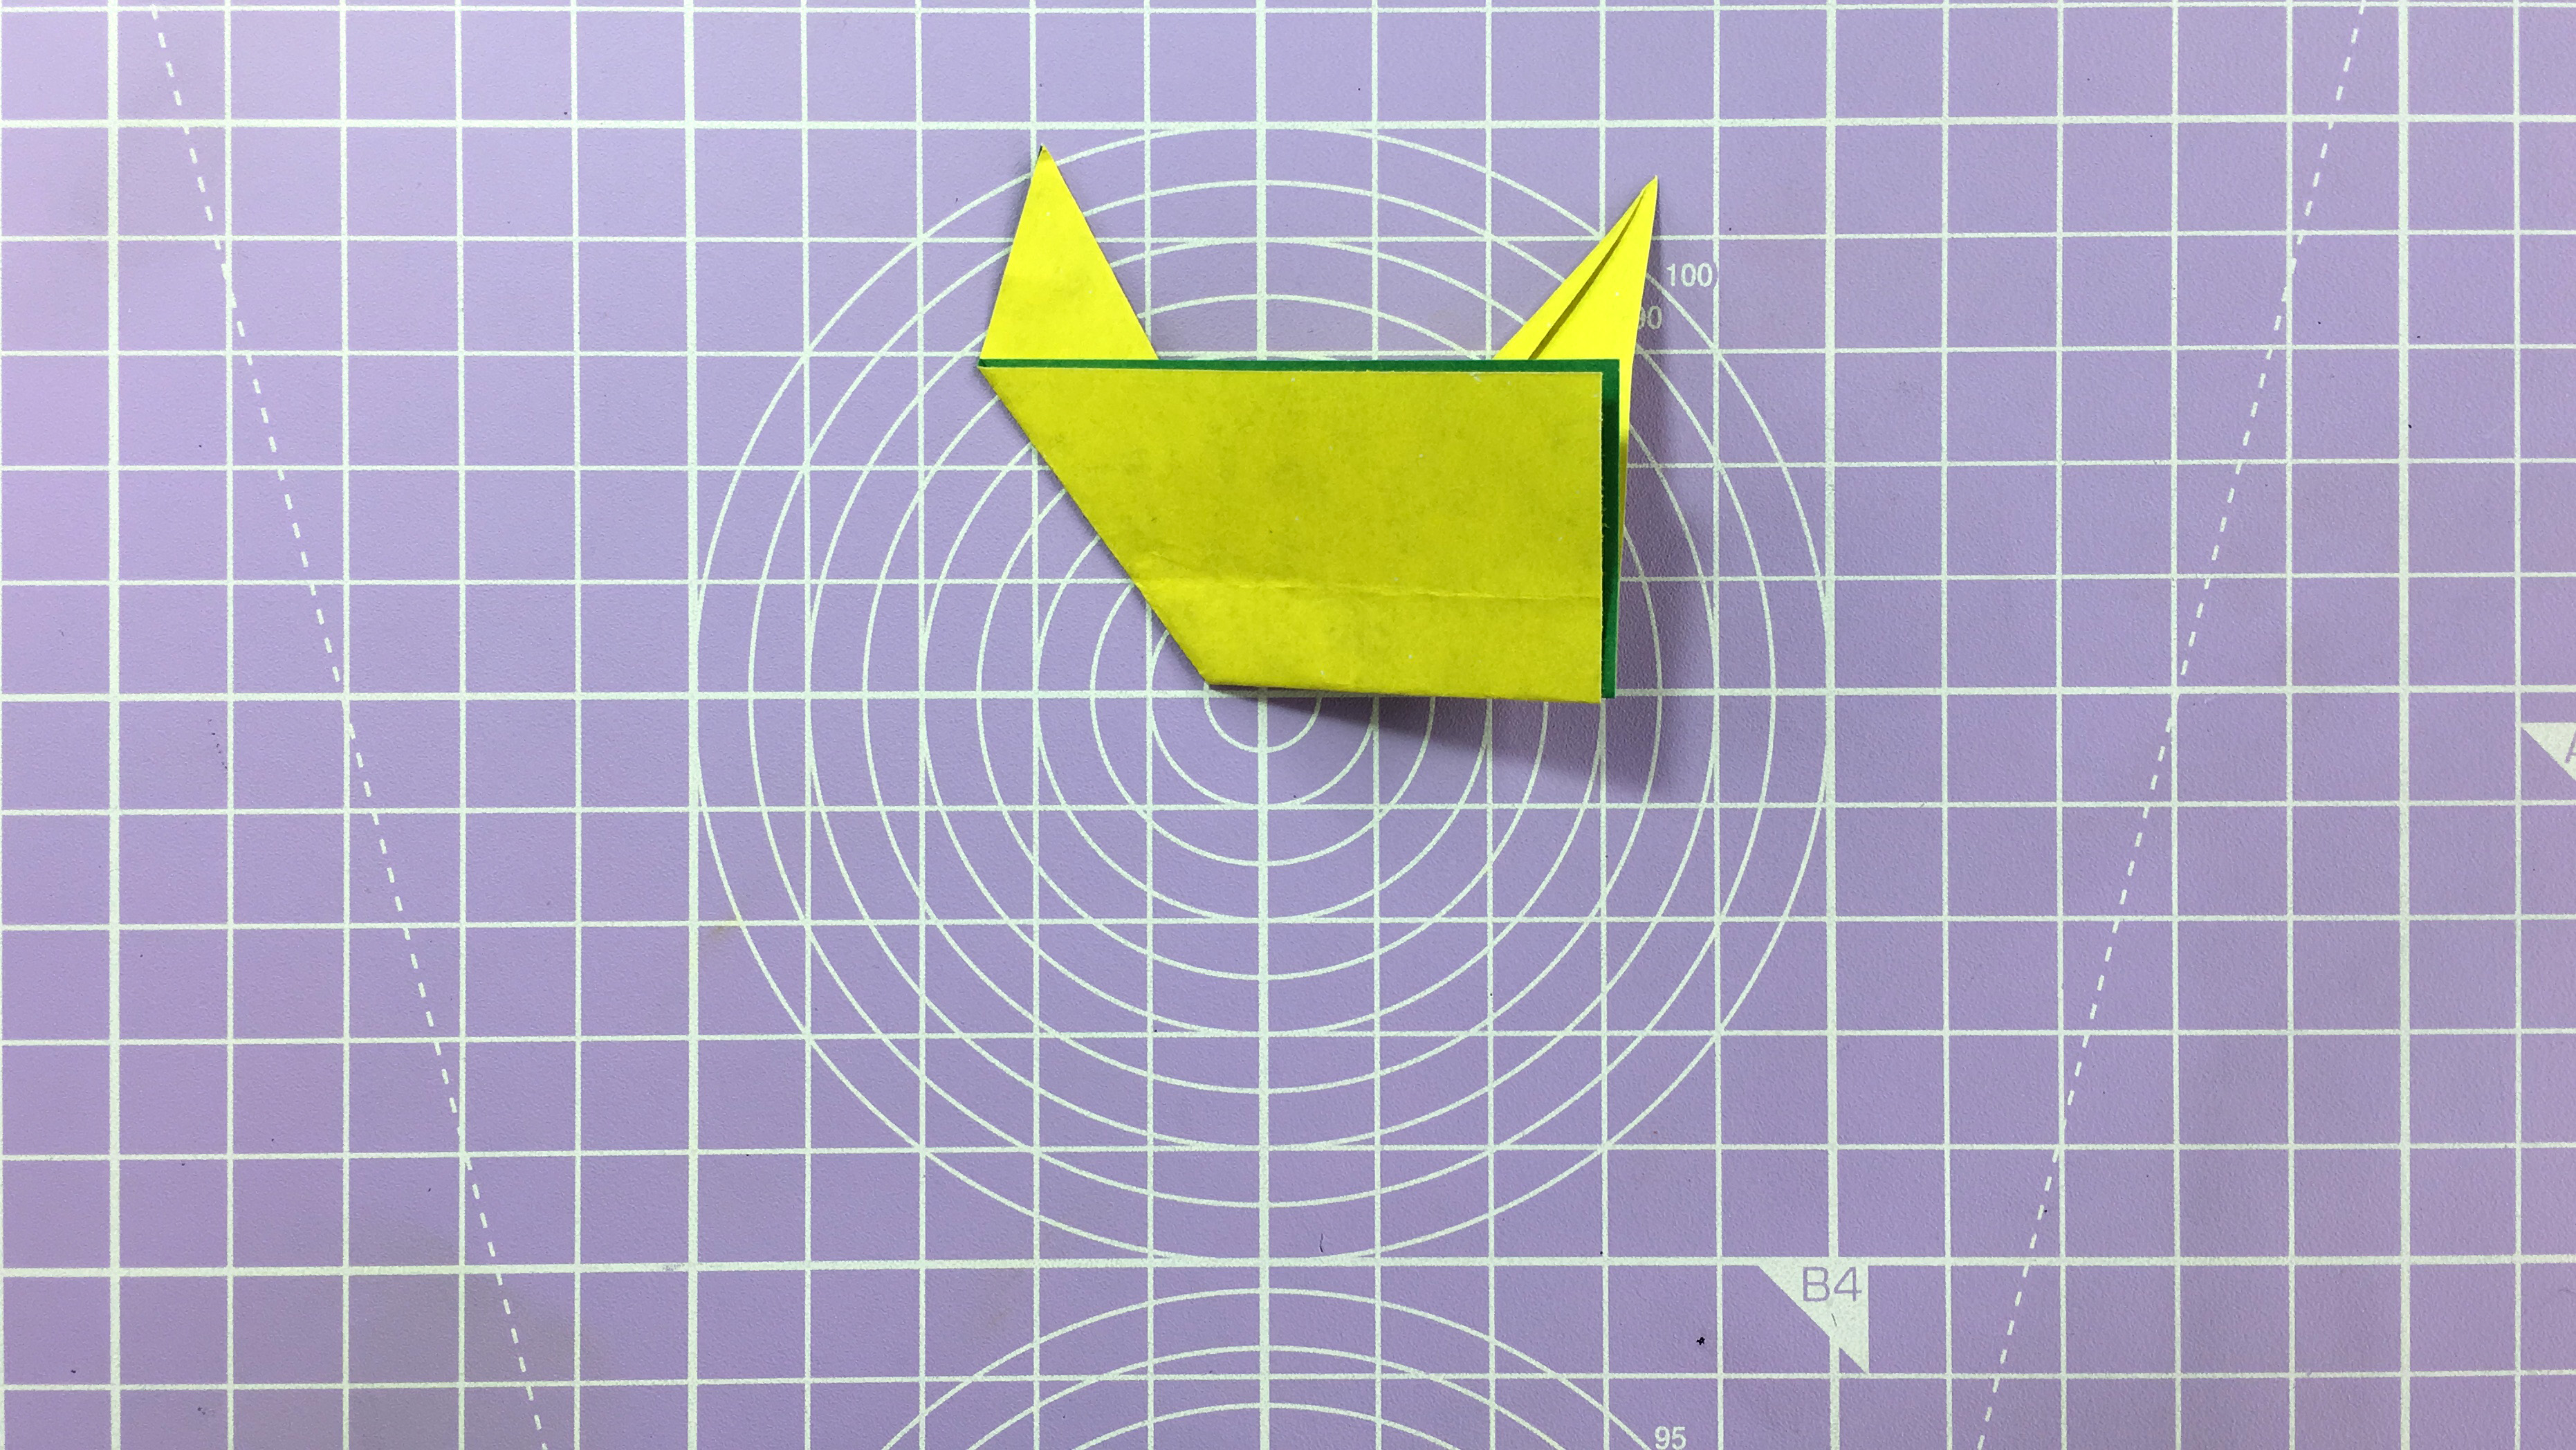 How to make an easy origami leaf - step 8a